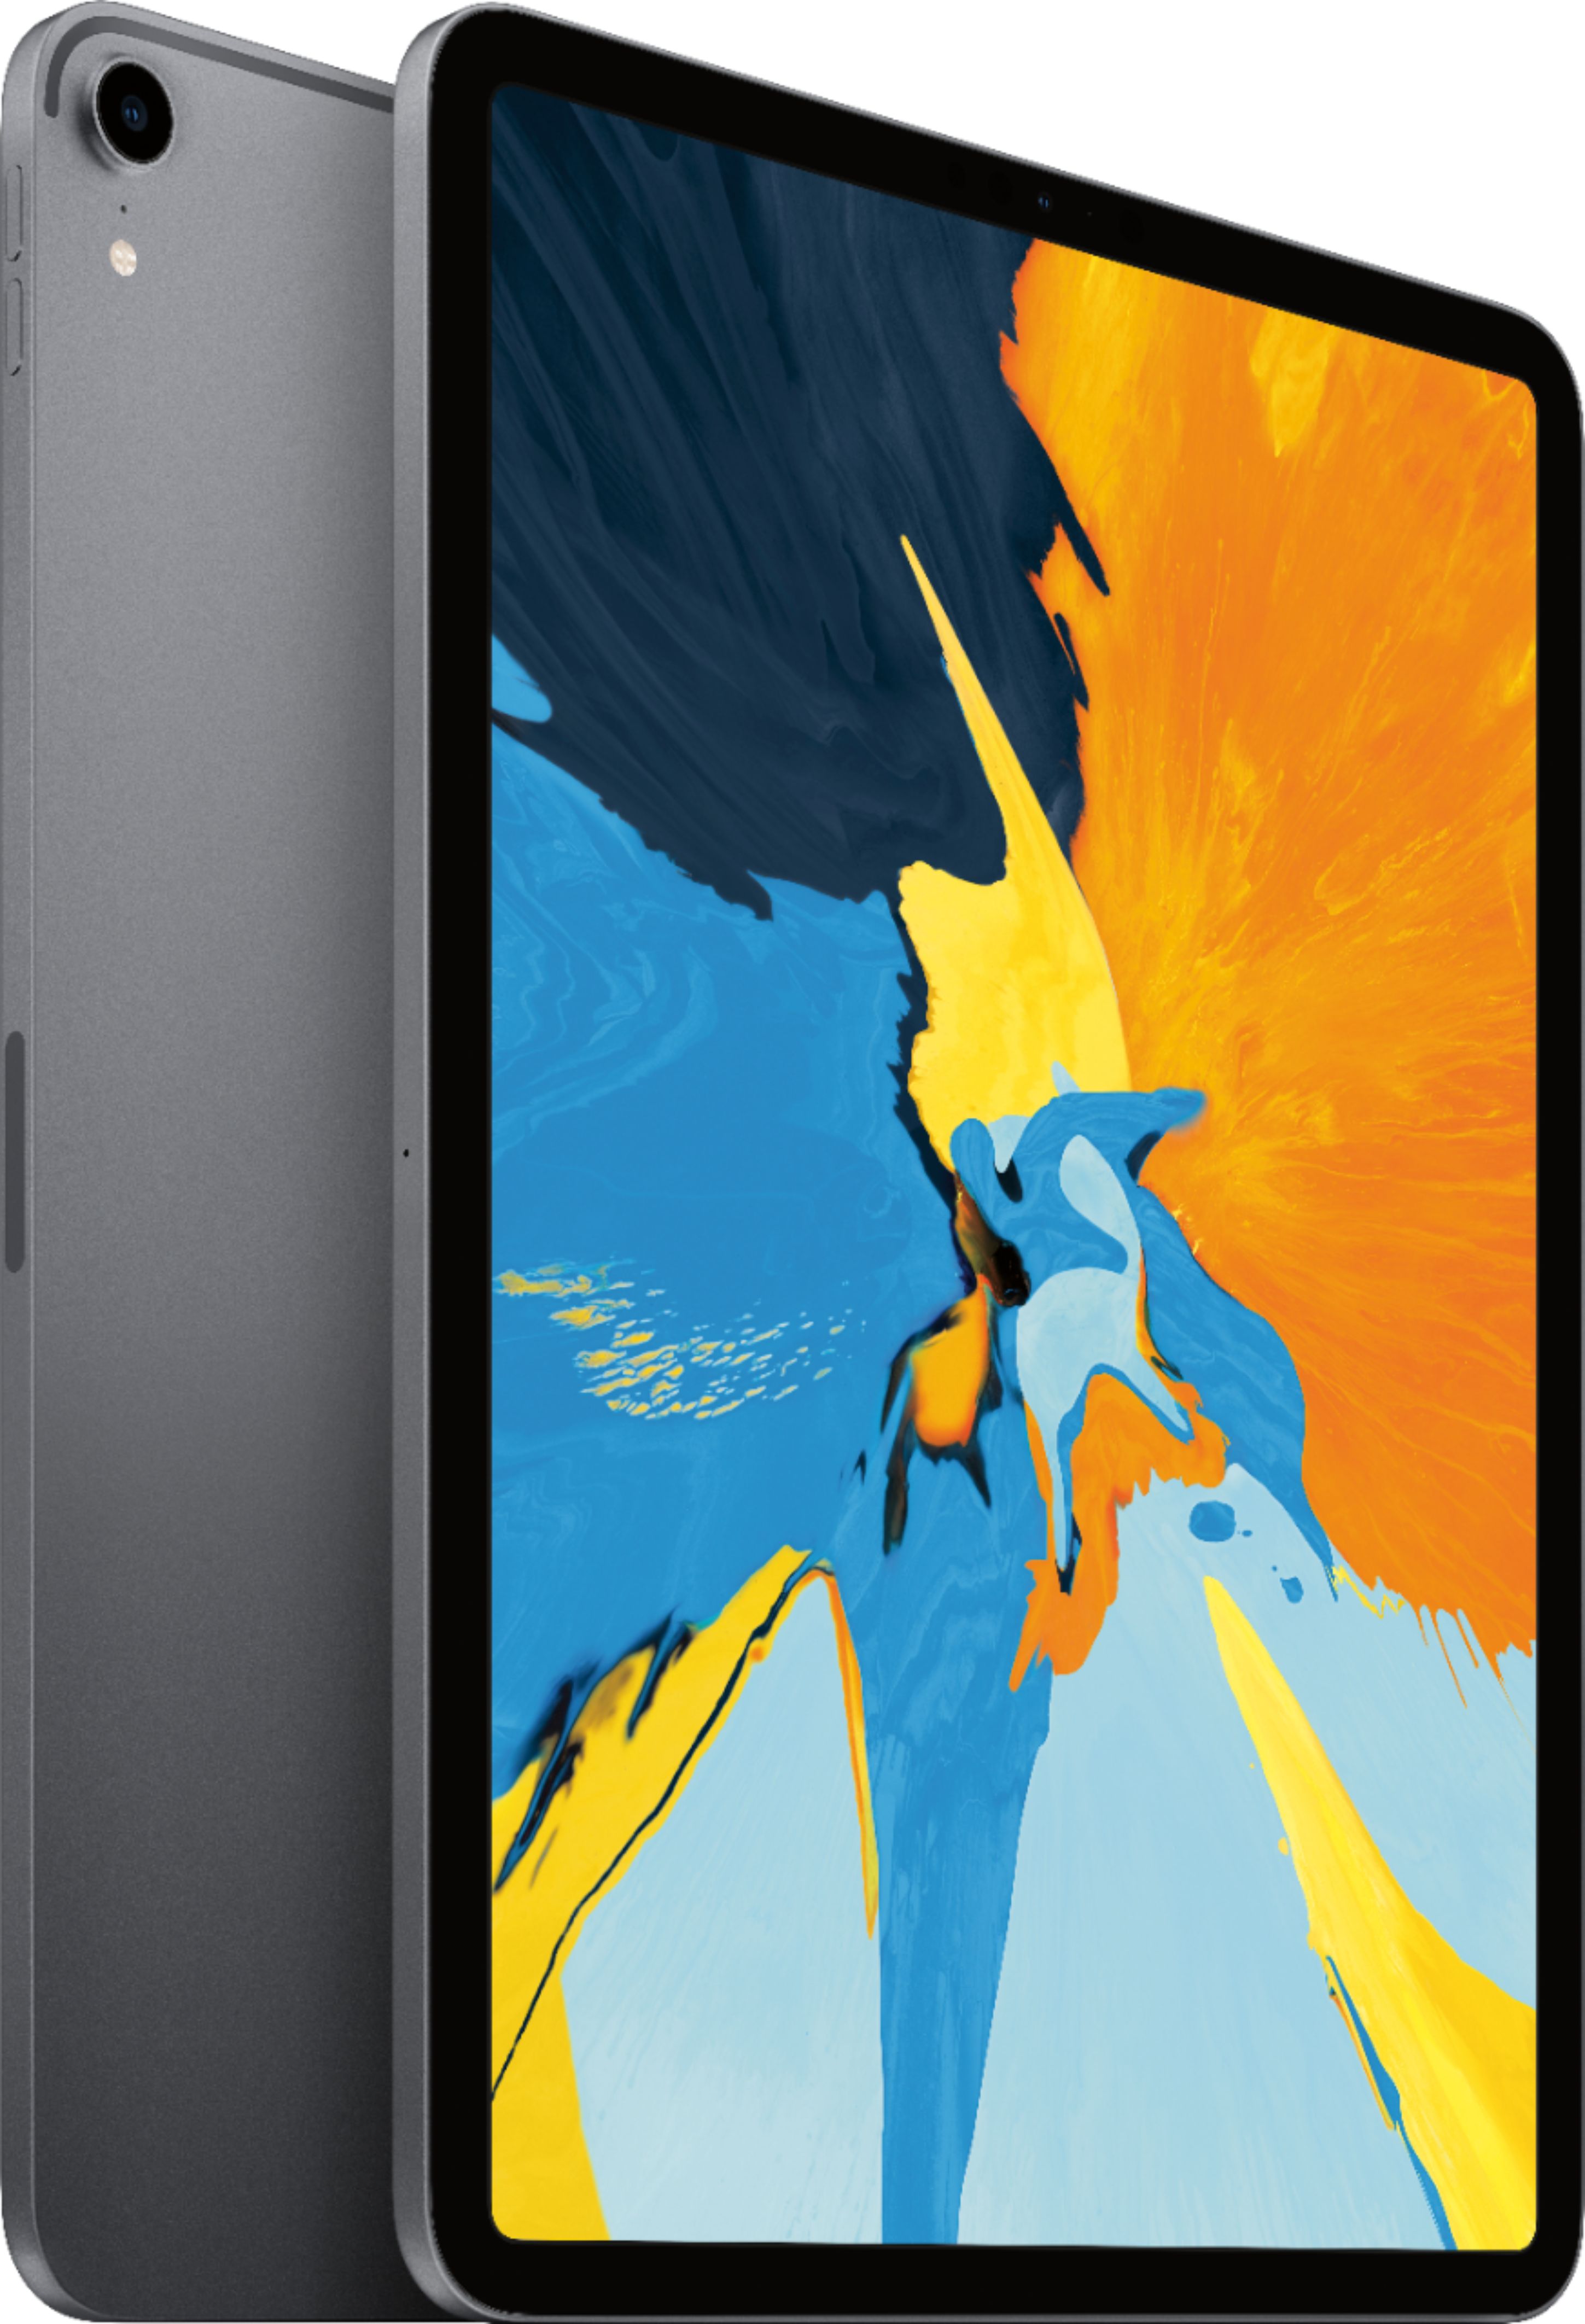 Angle View: Apple - Geek Squad Certified Refurbished 12.9-Inch iPad Pro (Latest Model) with Wi-Fi - 512GB - Space Gray